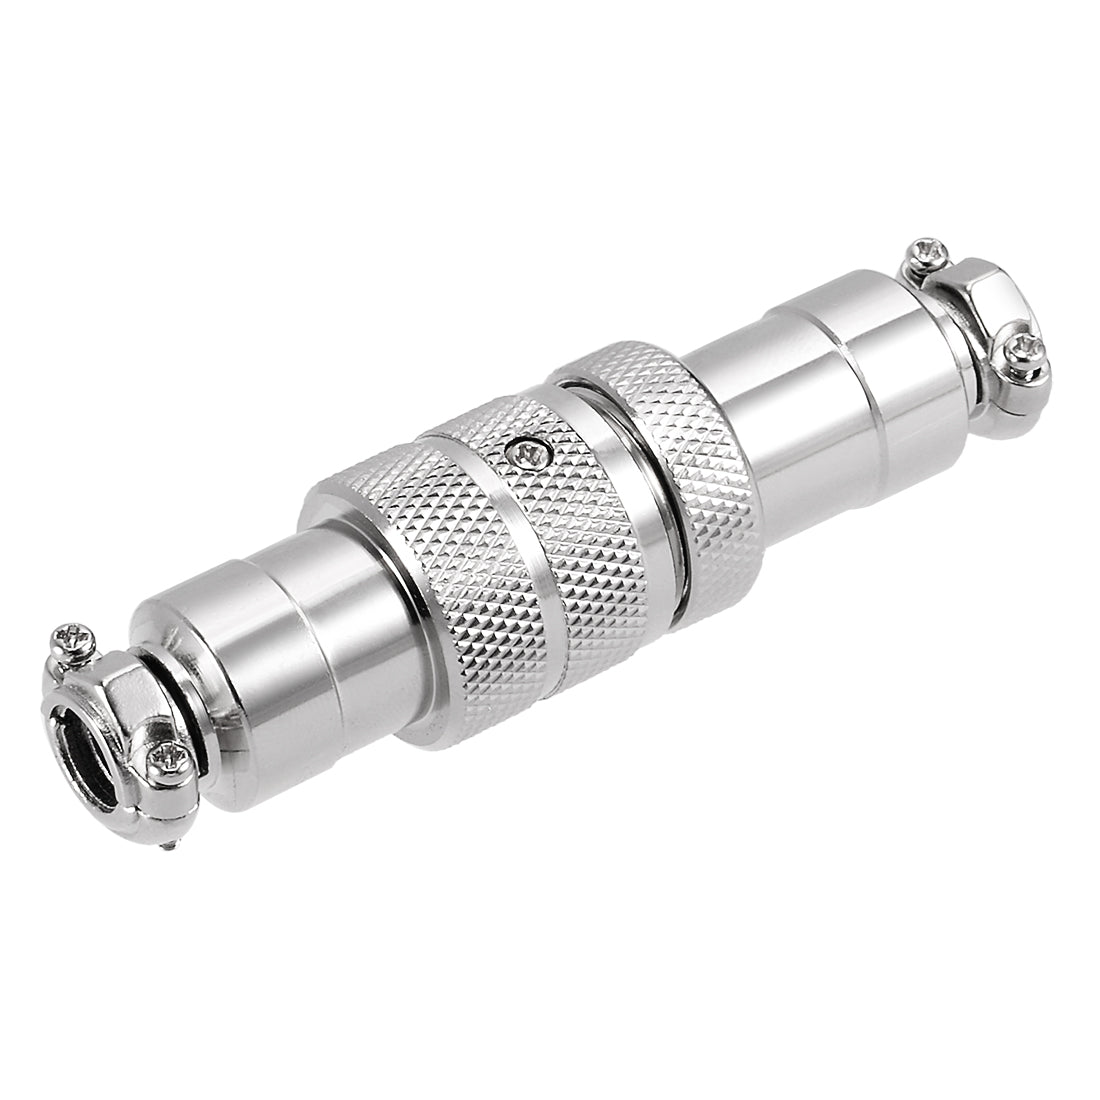 uxcell Uxcell Aviation Connector, 20mm 4P 10A 250V GX20-4 Waterproof Male Wire Panel Power Chassis Metal Fittings Connector Aviation Silver Tone